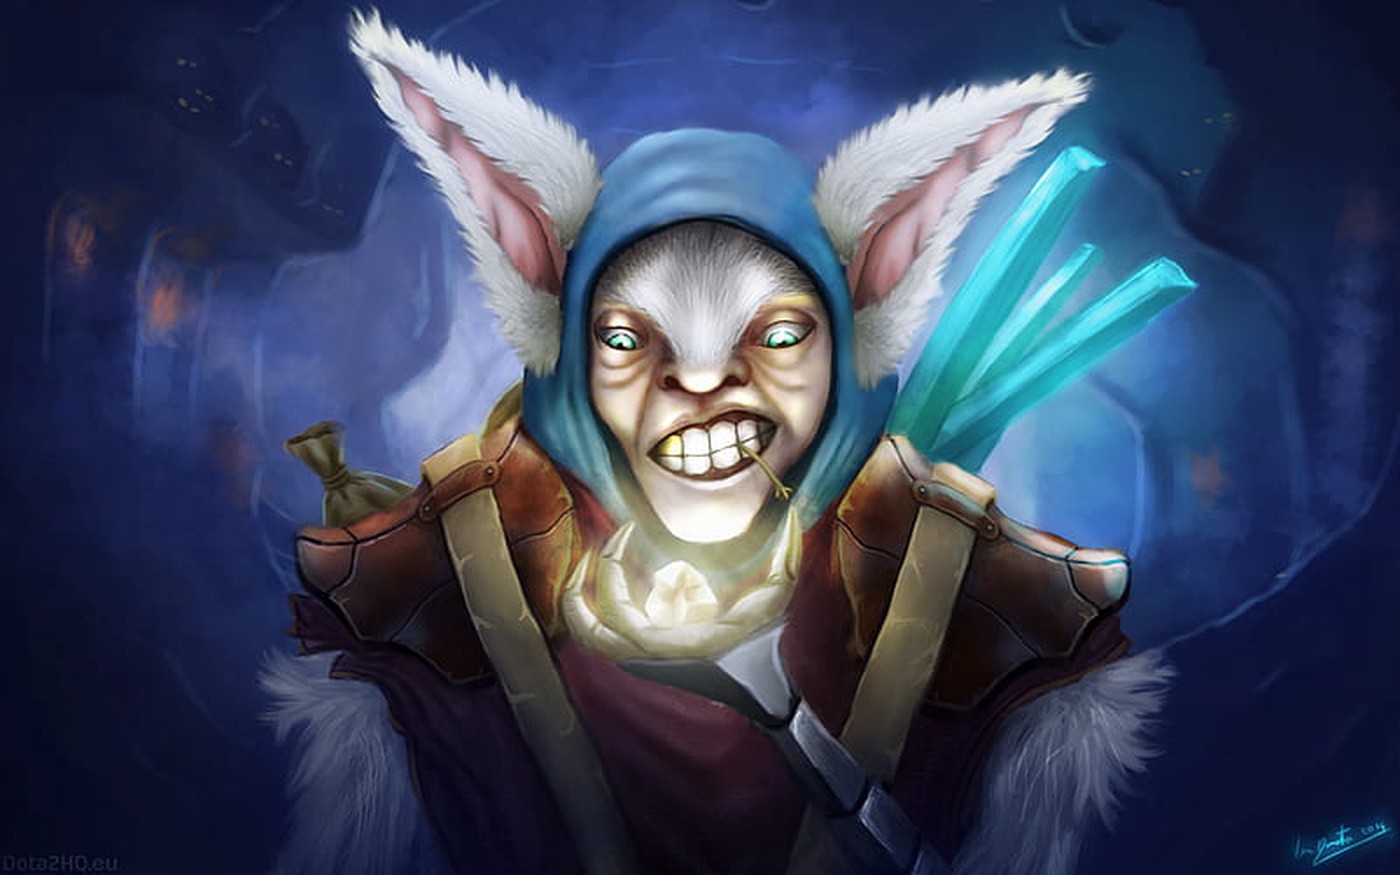 Meepo Temporarily Removed from Dota 2 Due to Unlimited Gold Bug Abuse